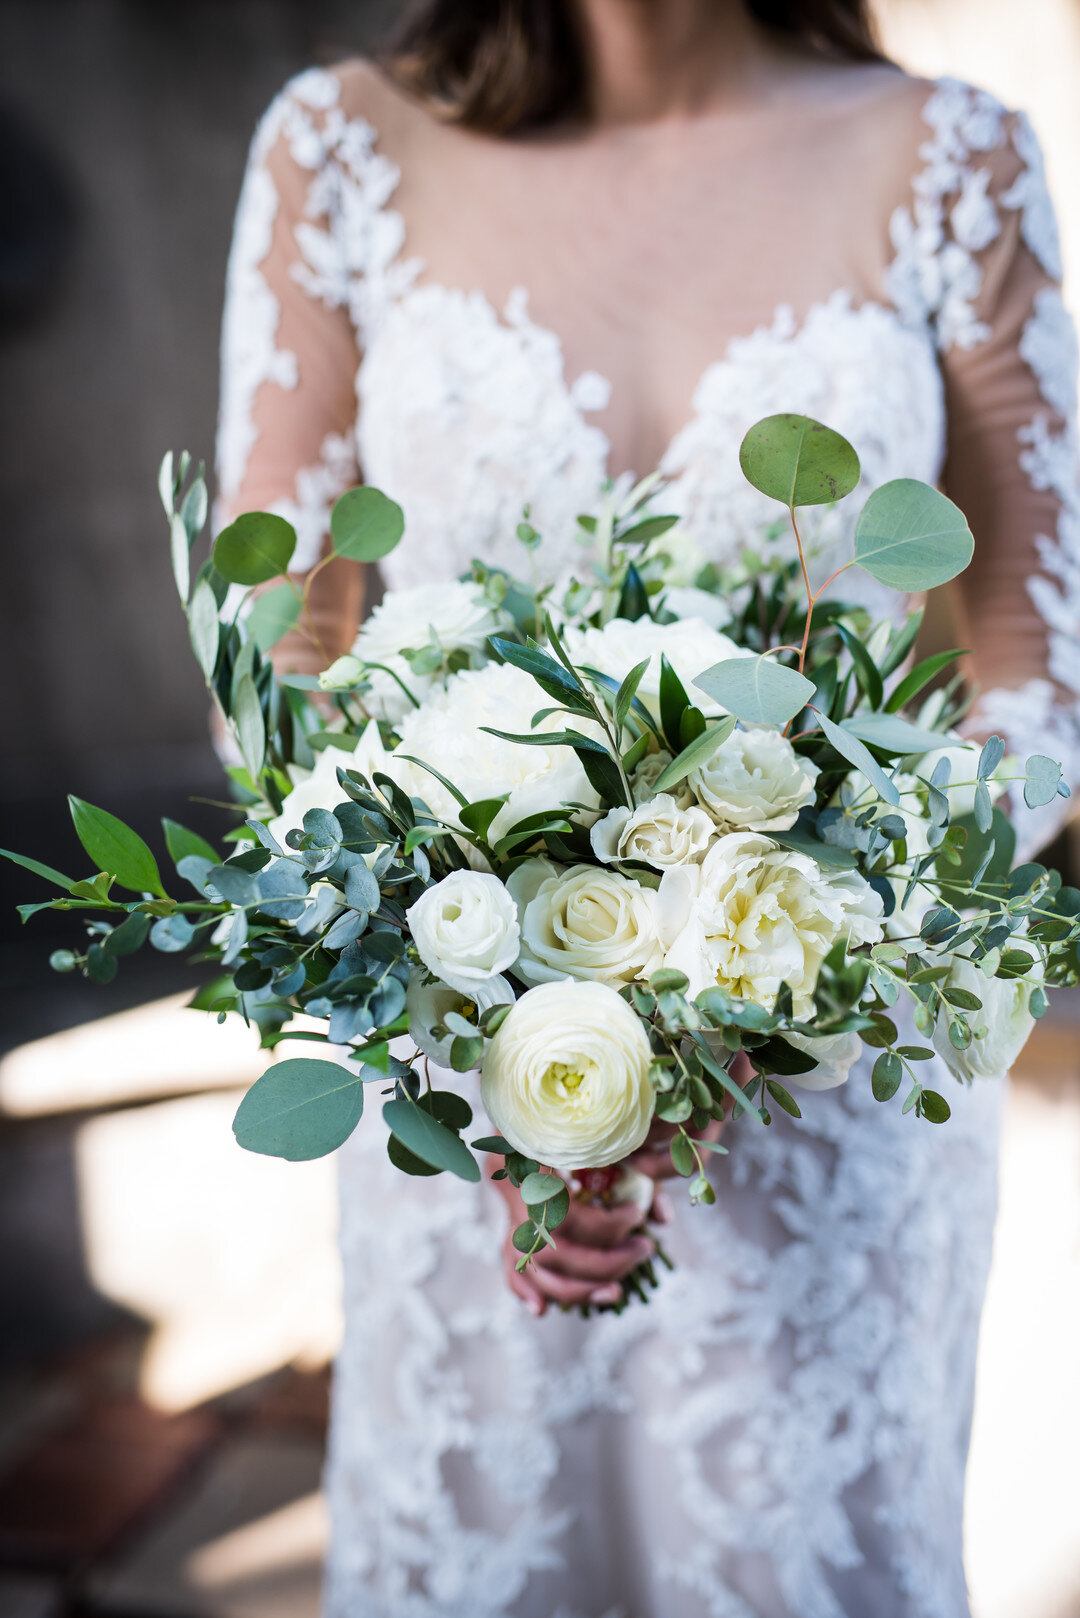 White and greenery wedding bouquet: Golden Hour Armour House Chicago Wedding captured by Inspired Eye Photography featured on CHI thee WED. Find more wedding ideas at CHItheeWED.com!